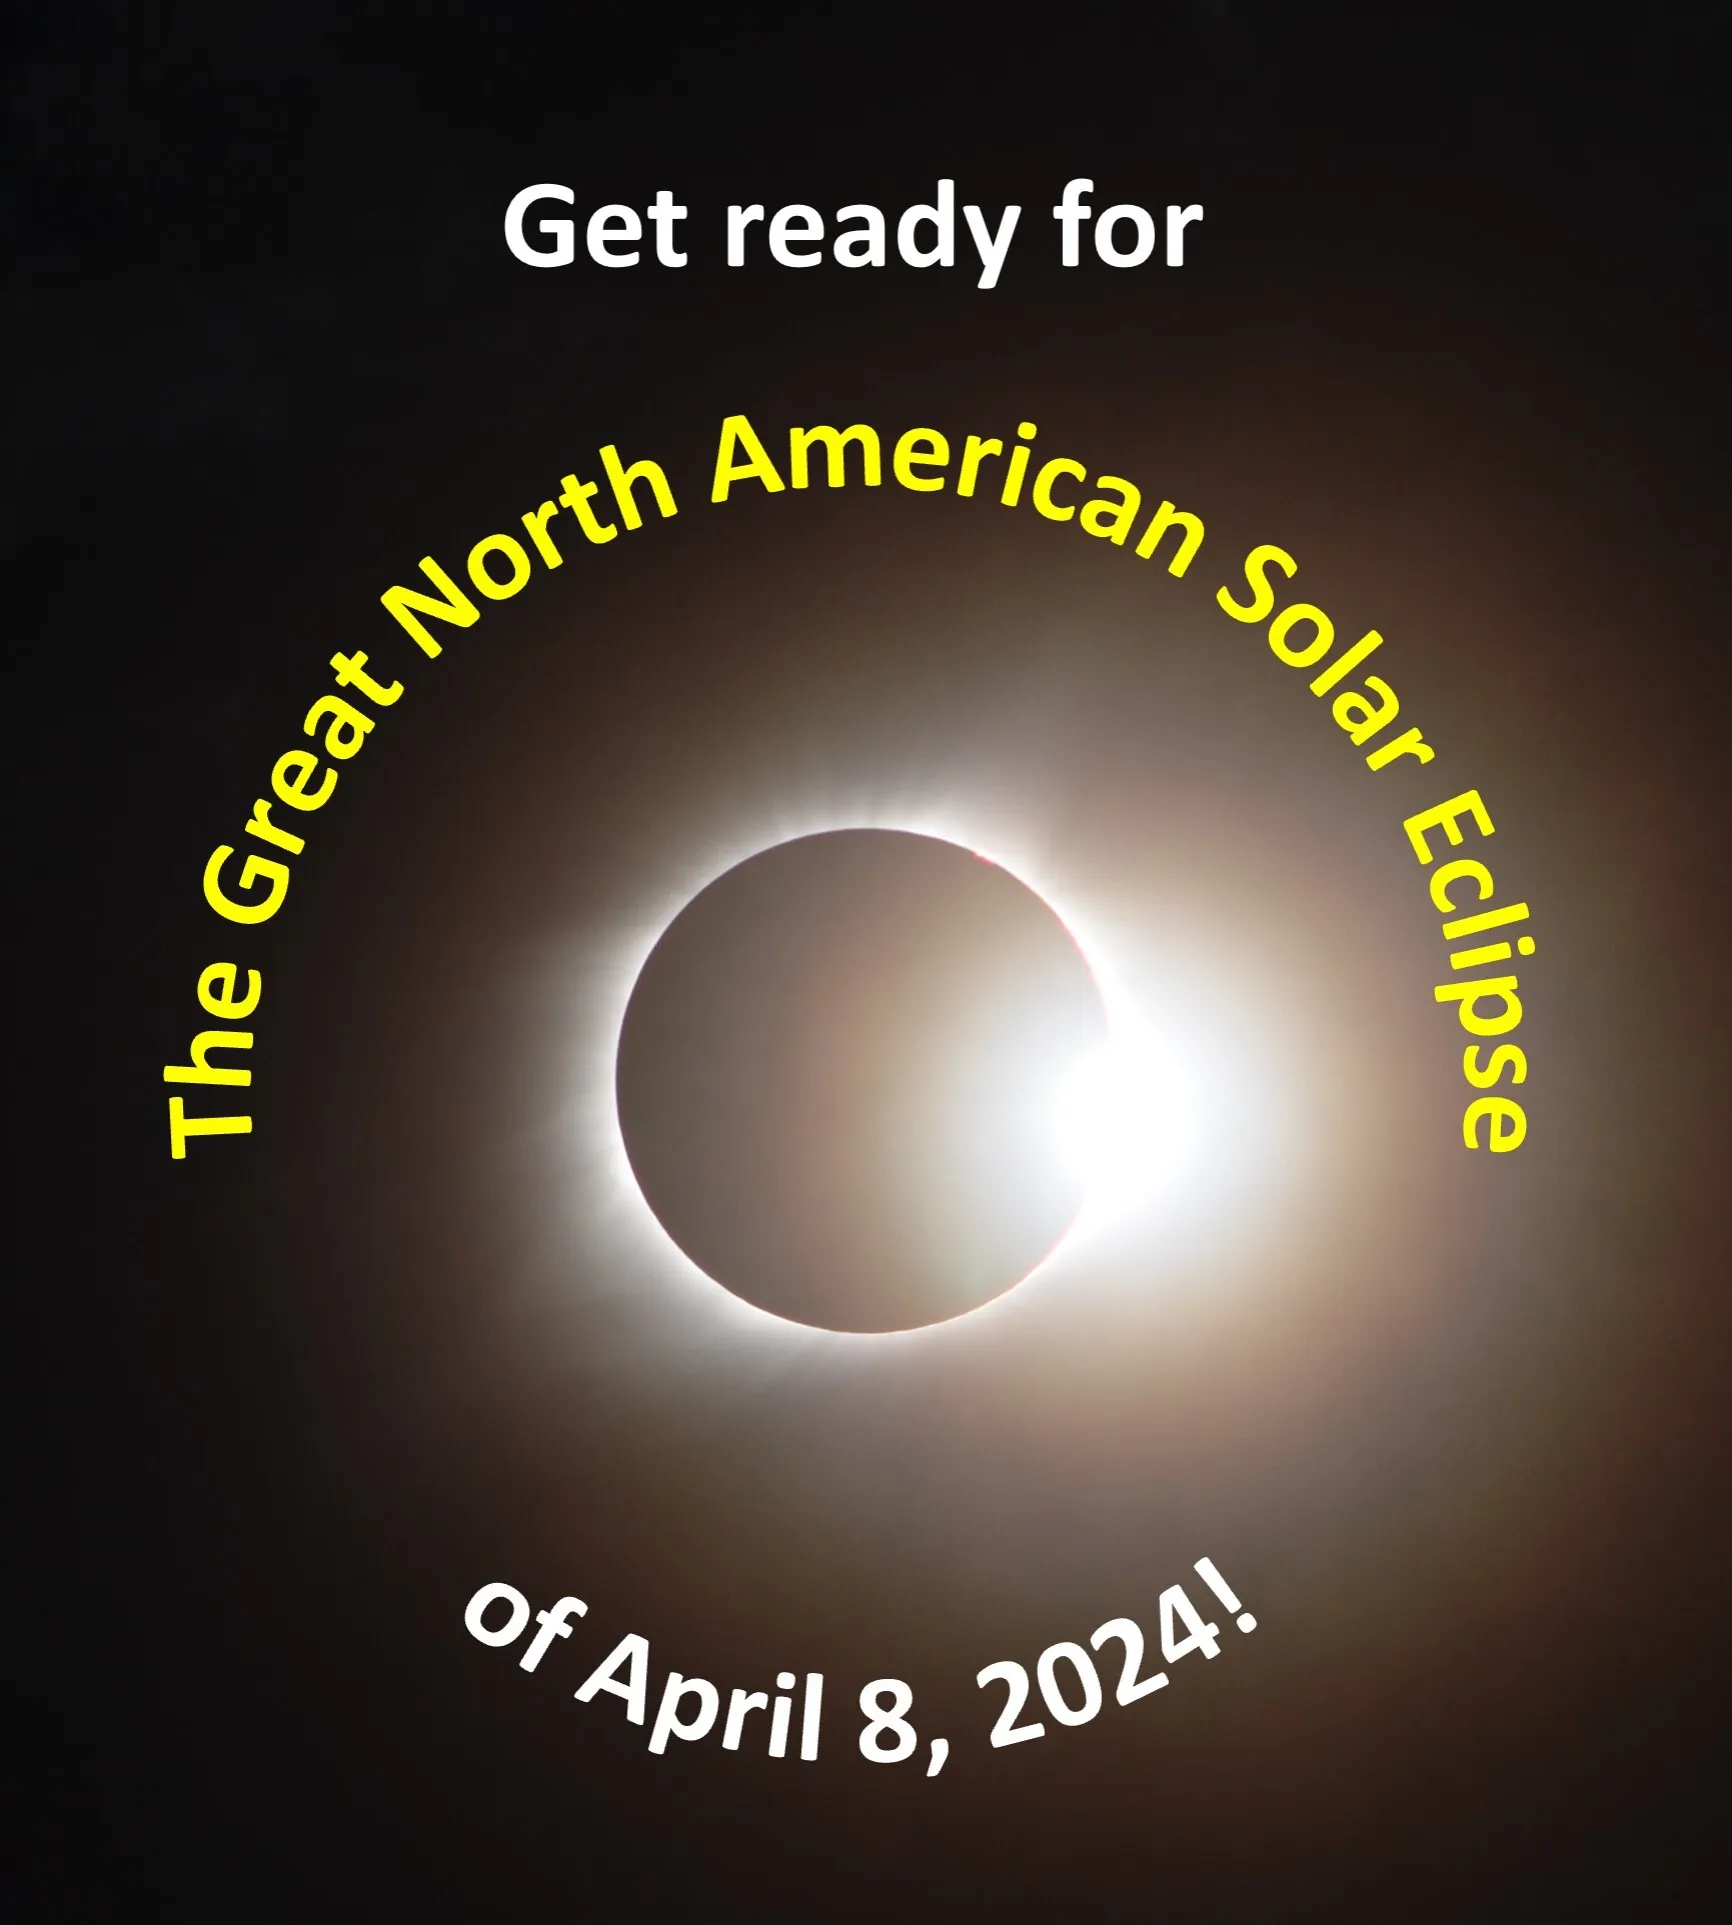 SVC physics department will conduct solar eclipse program and planetarium shows